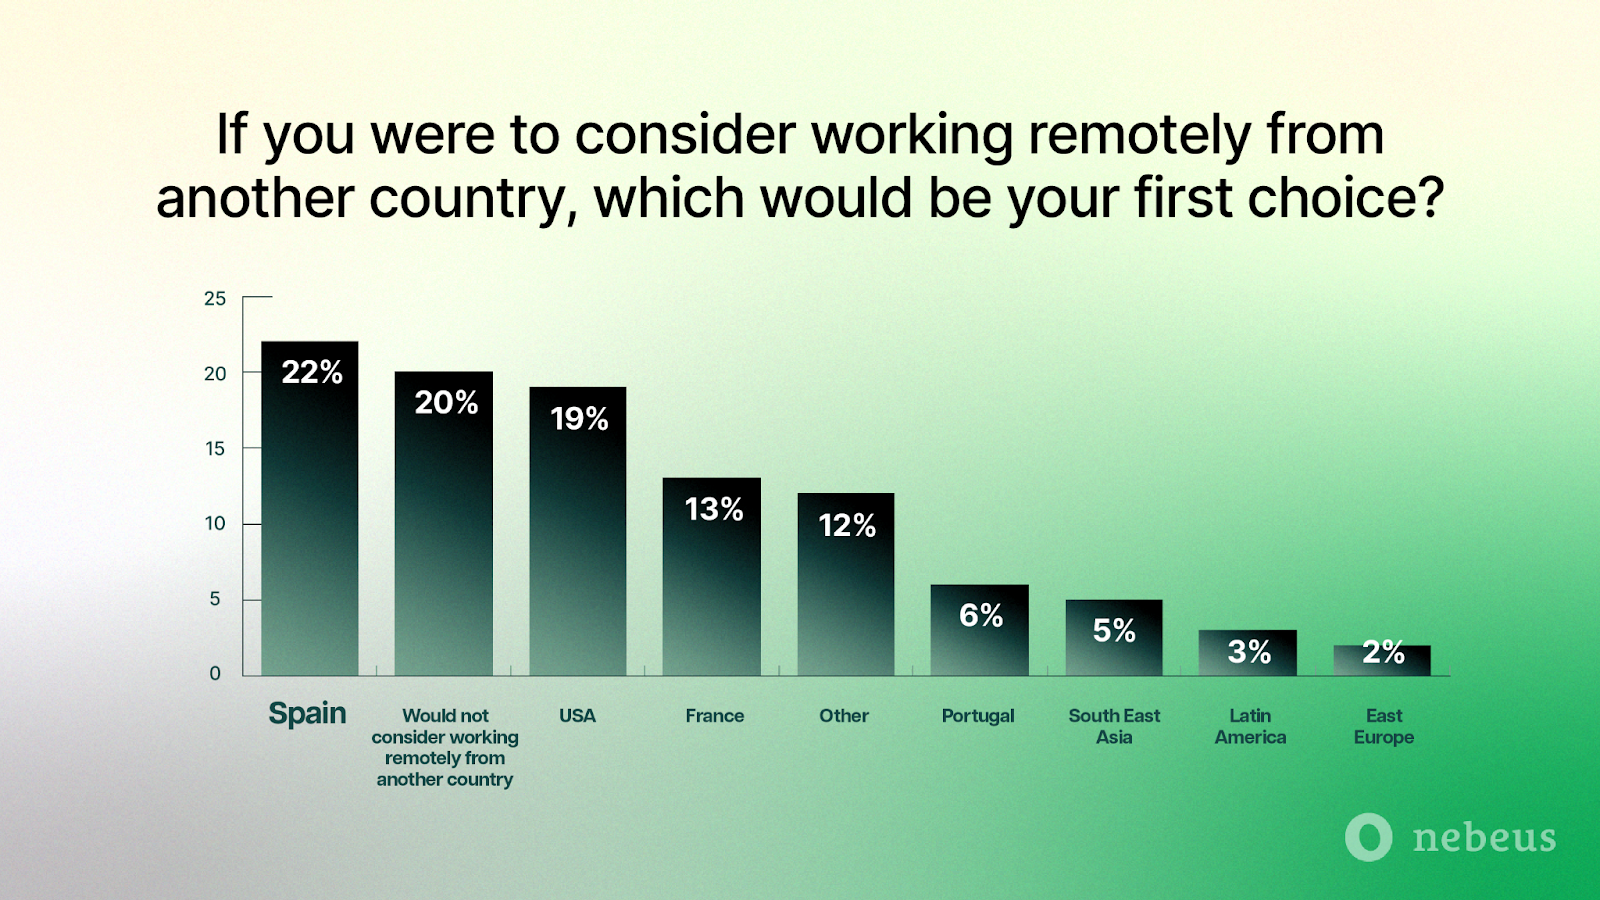 Why Spain Tops the Dream List for Remote Working Among Brits